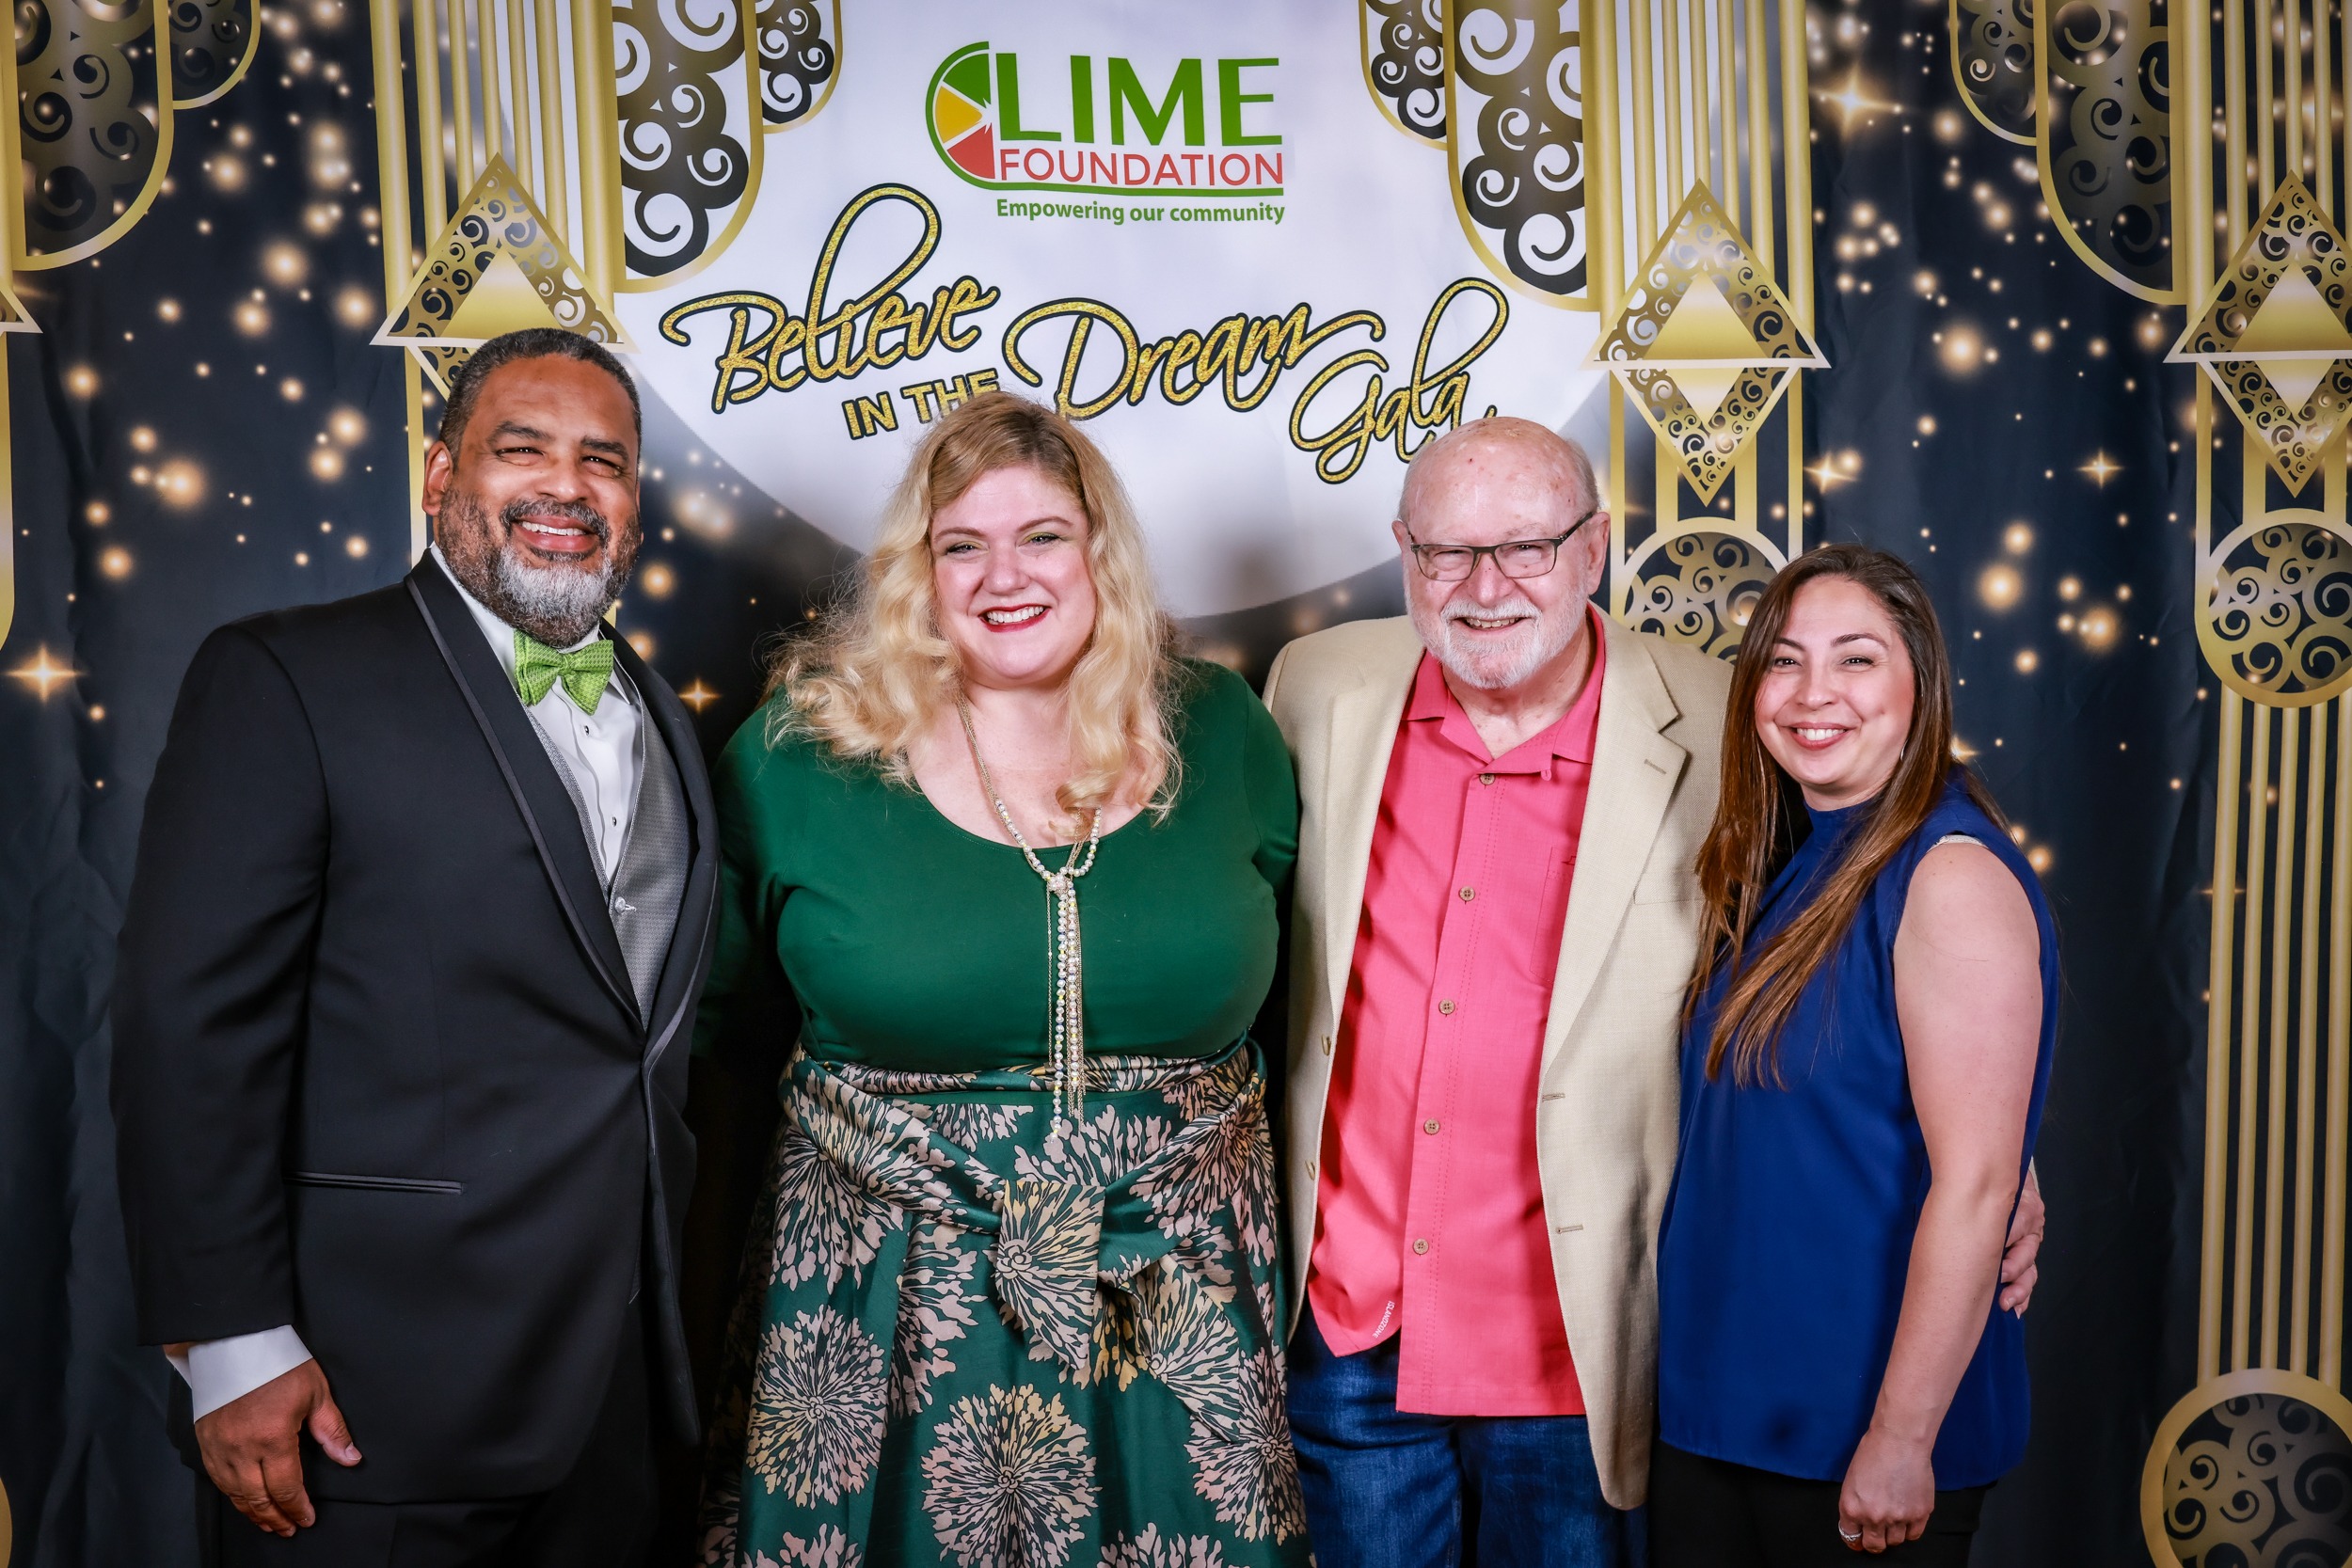 A group of people posing for a photo at The LIME Foundation event.